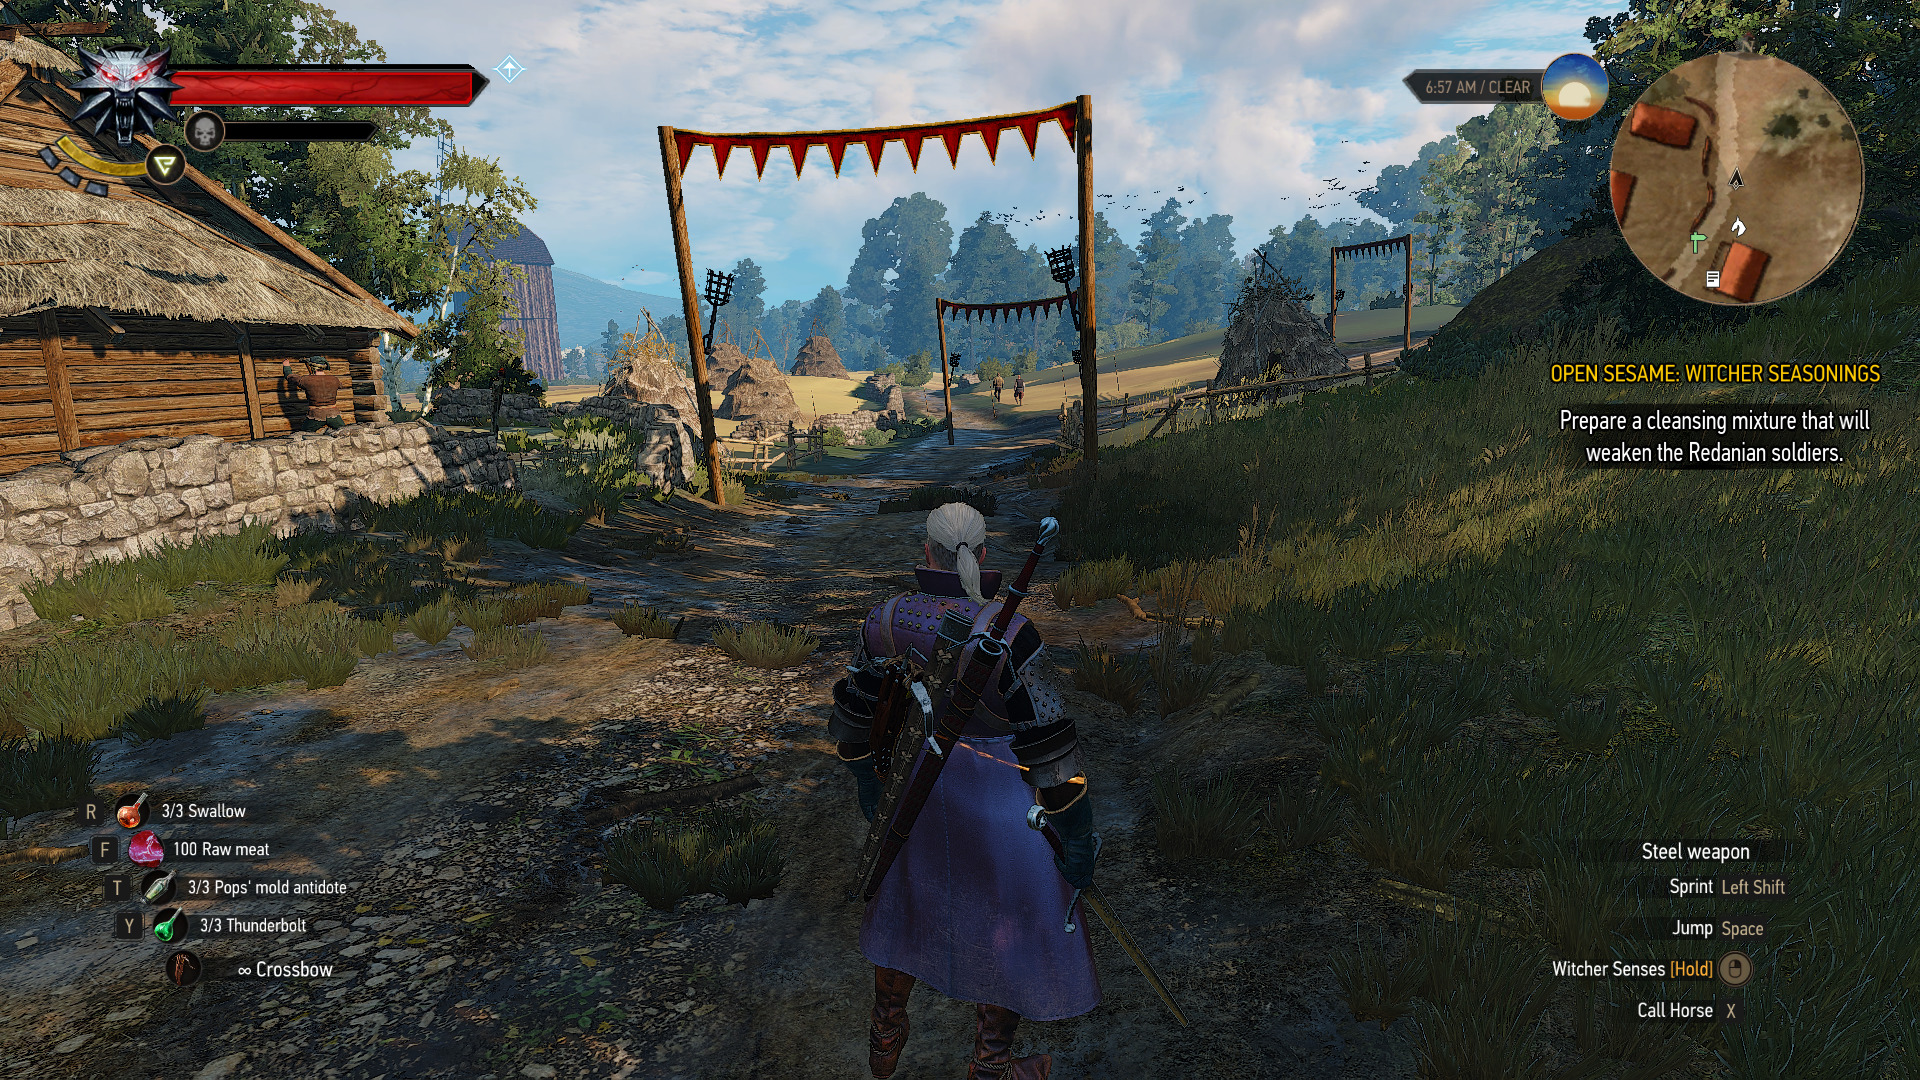 [sizer=red]The Witcher 3: Hearts of Stone Video İnceleme